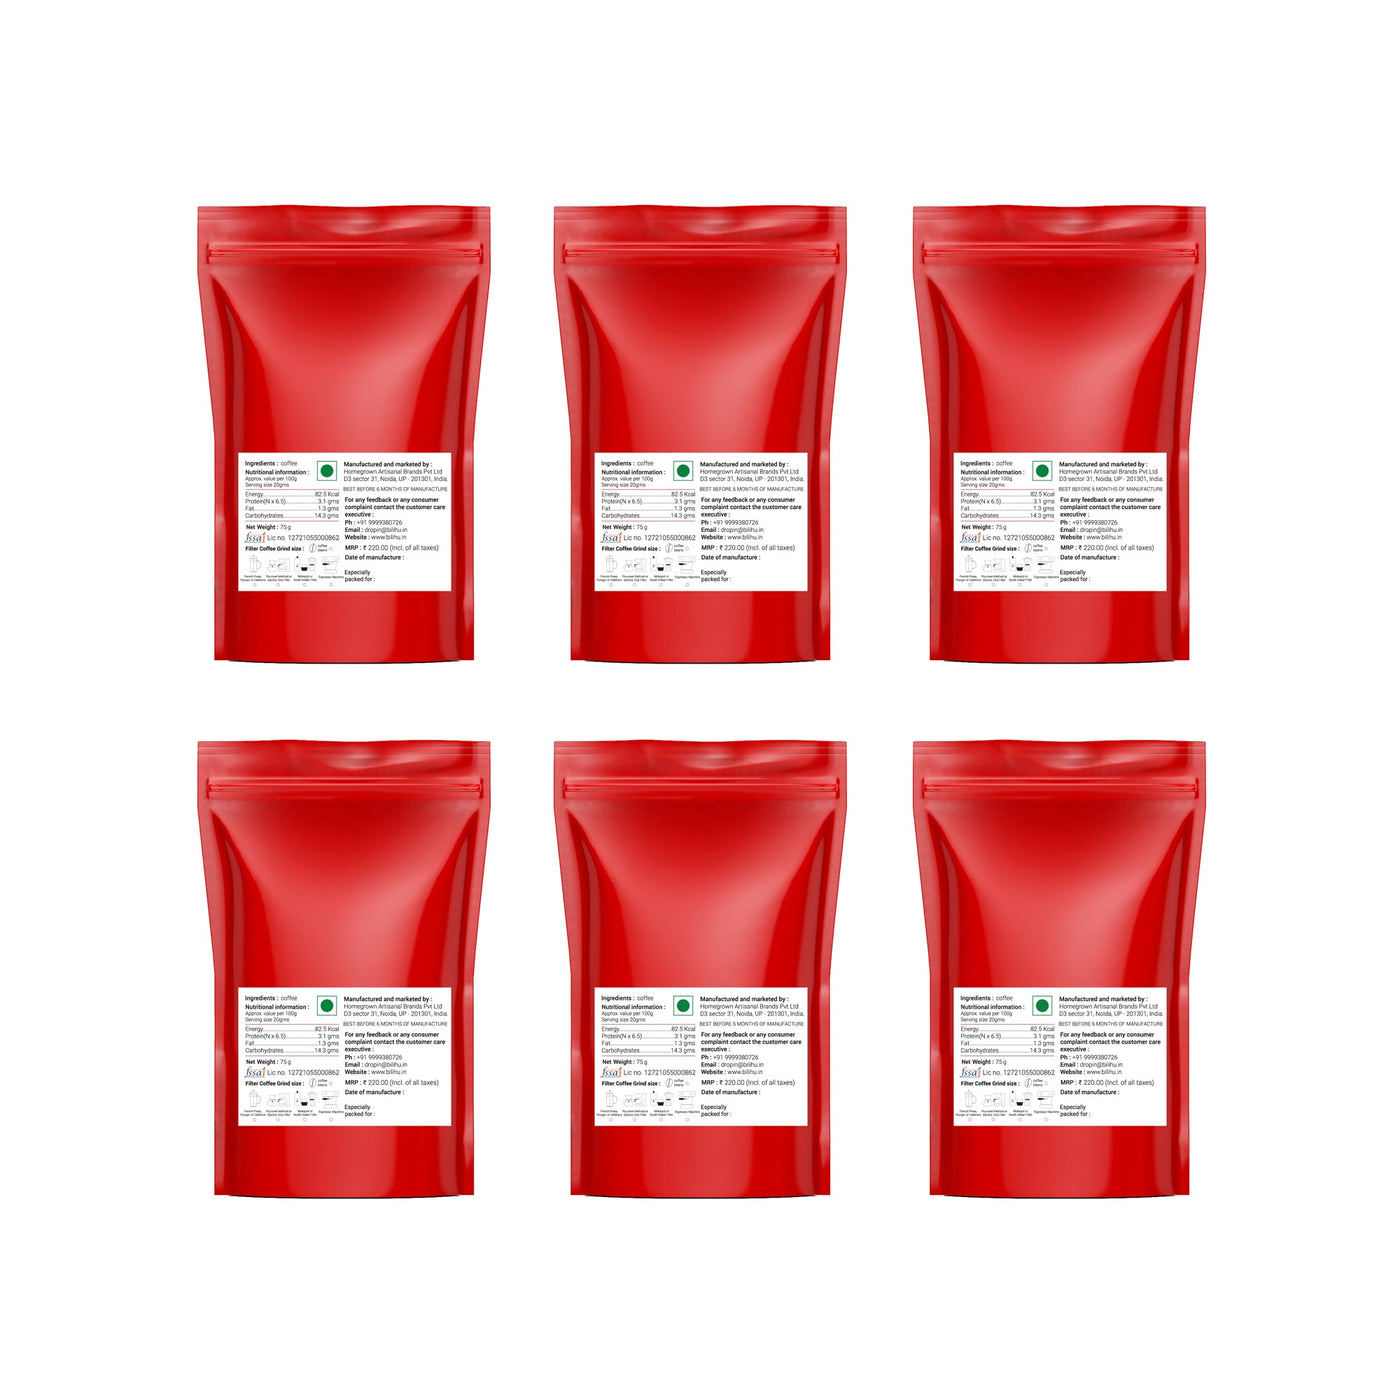 Trial set - 6 assorted packs of coffee (75g each)